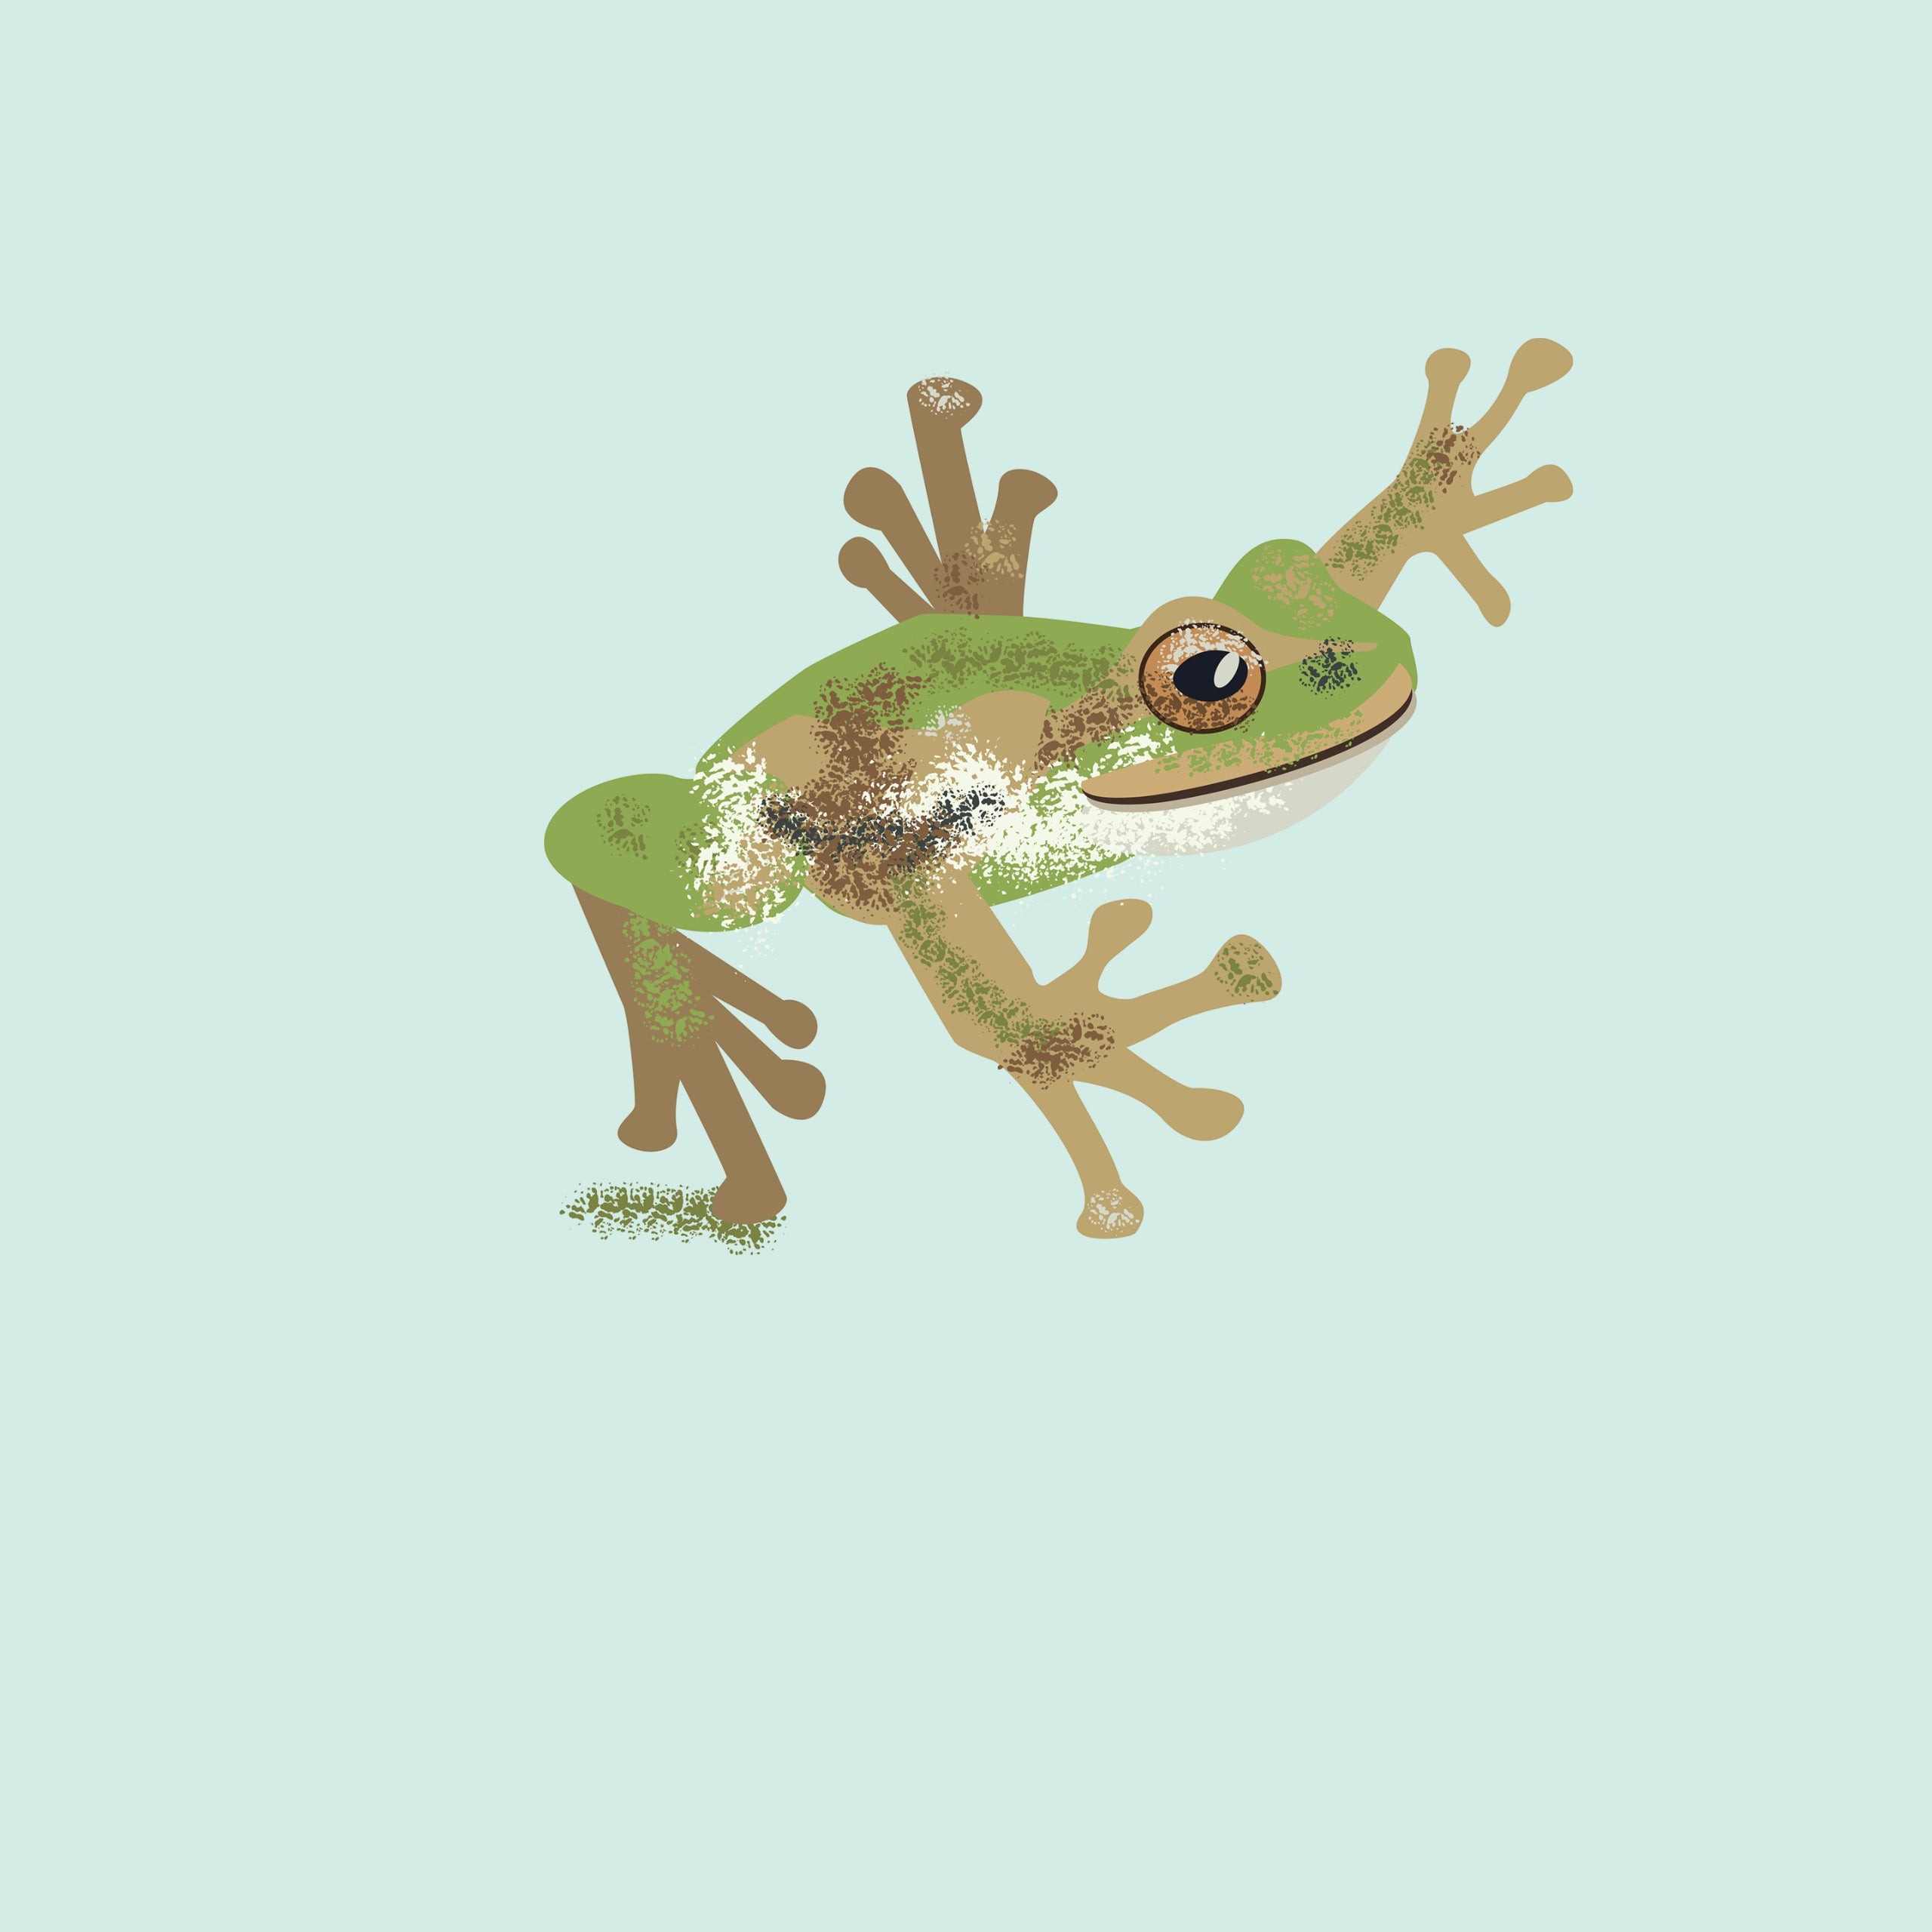 Illustrated Spotted Tree Frog